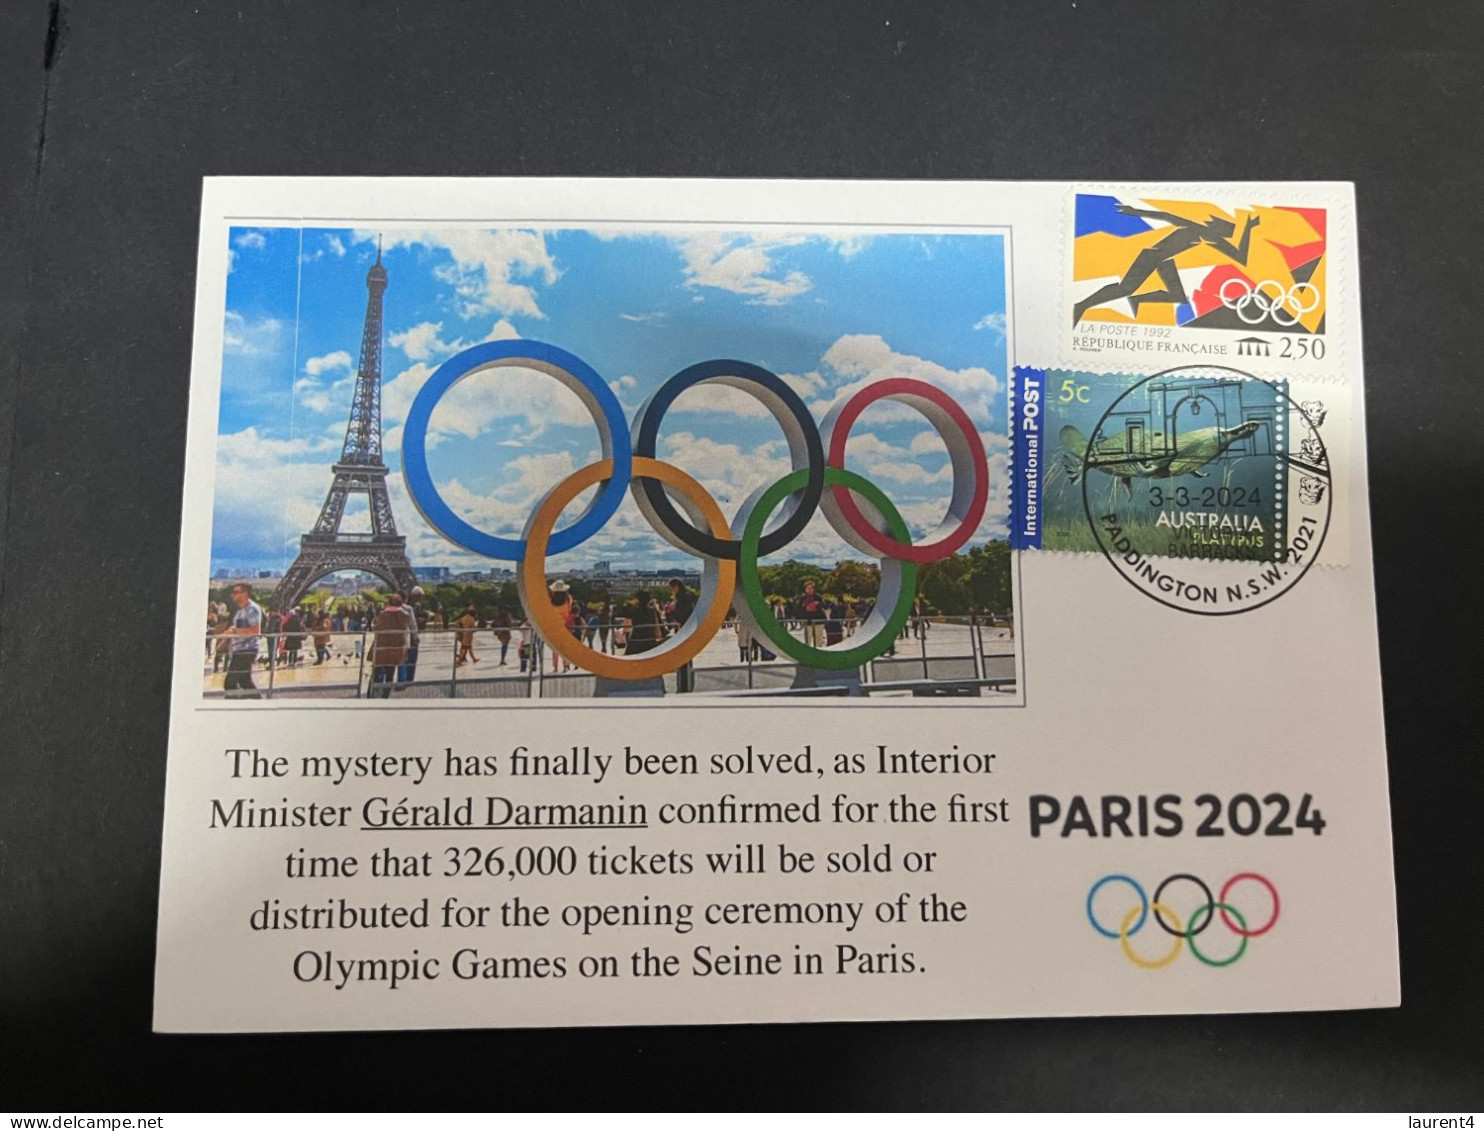 7-3-2024 (2 Y 22) Paris 2024 Summer Olympic - 326,000 Tickets Available To The Games Opening Ceremony On Seine River - Sommer 2024: Paris